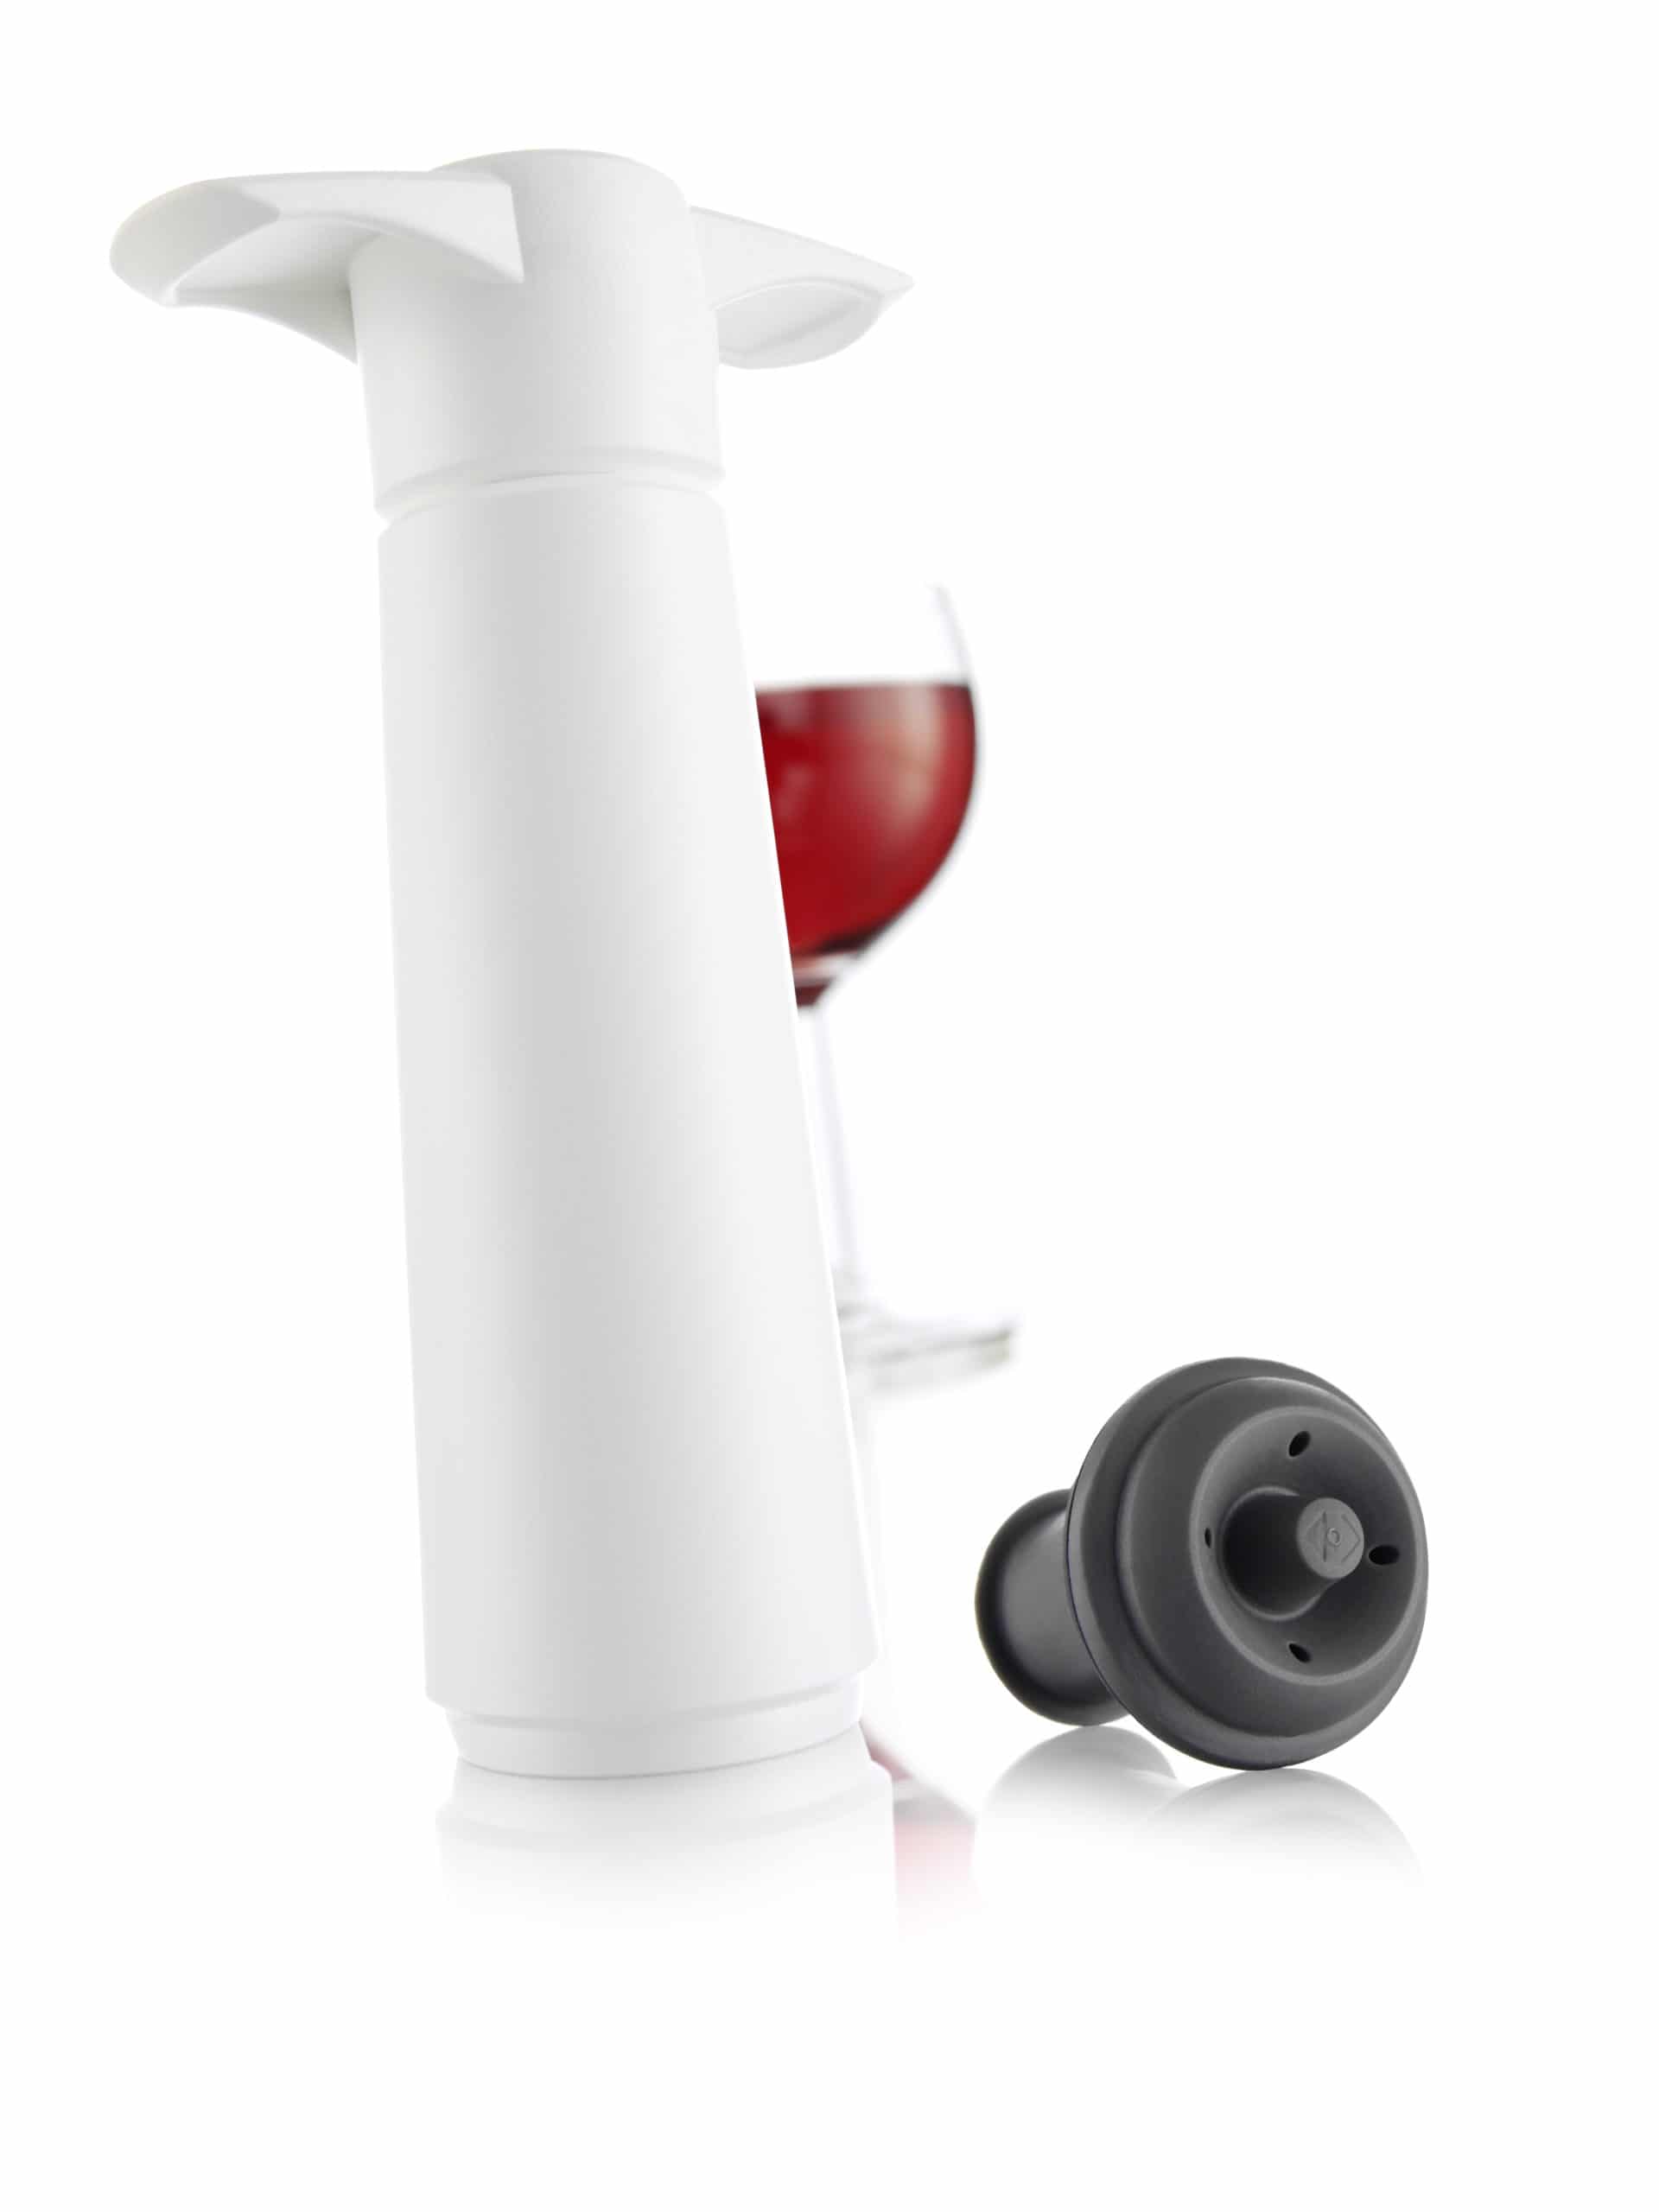 Why We Love the Vacu Vin Wine Stopper